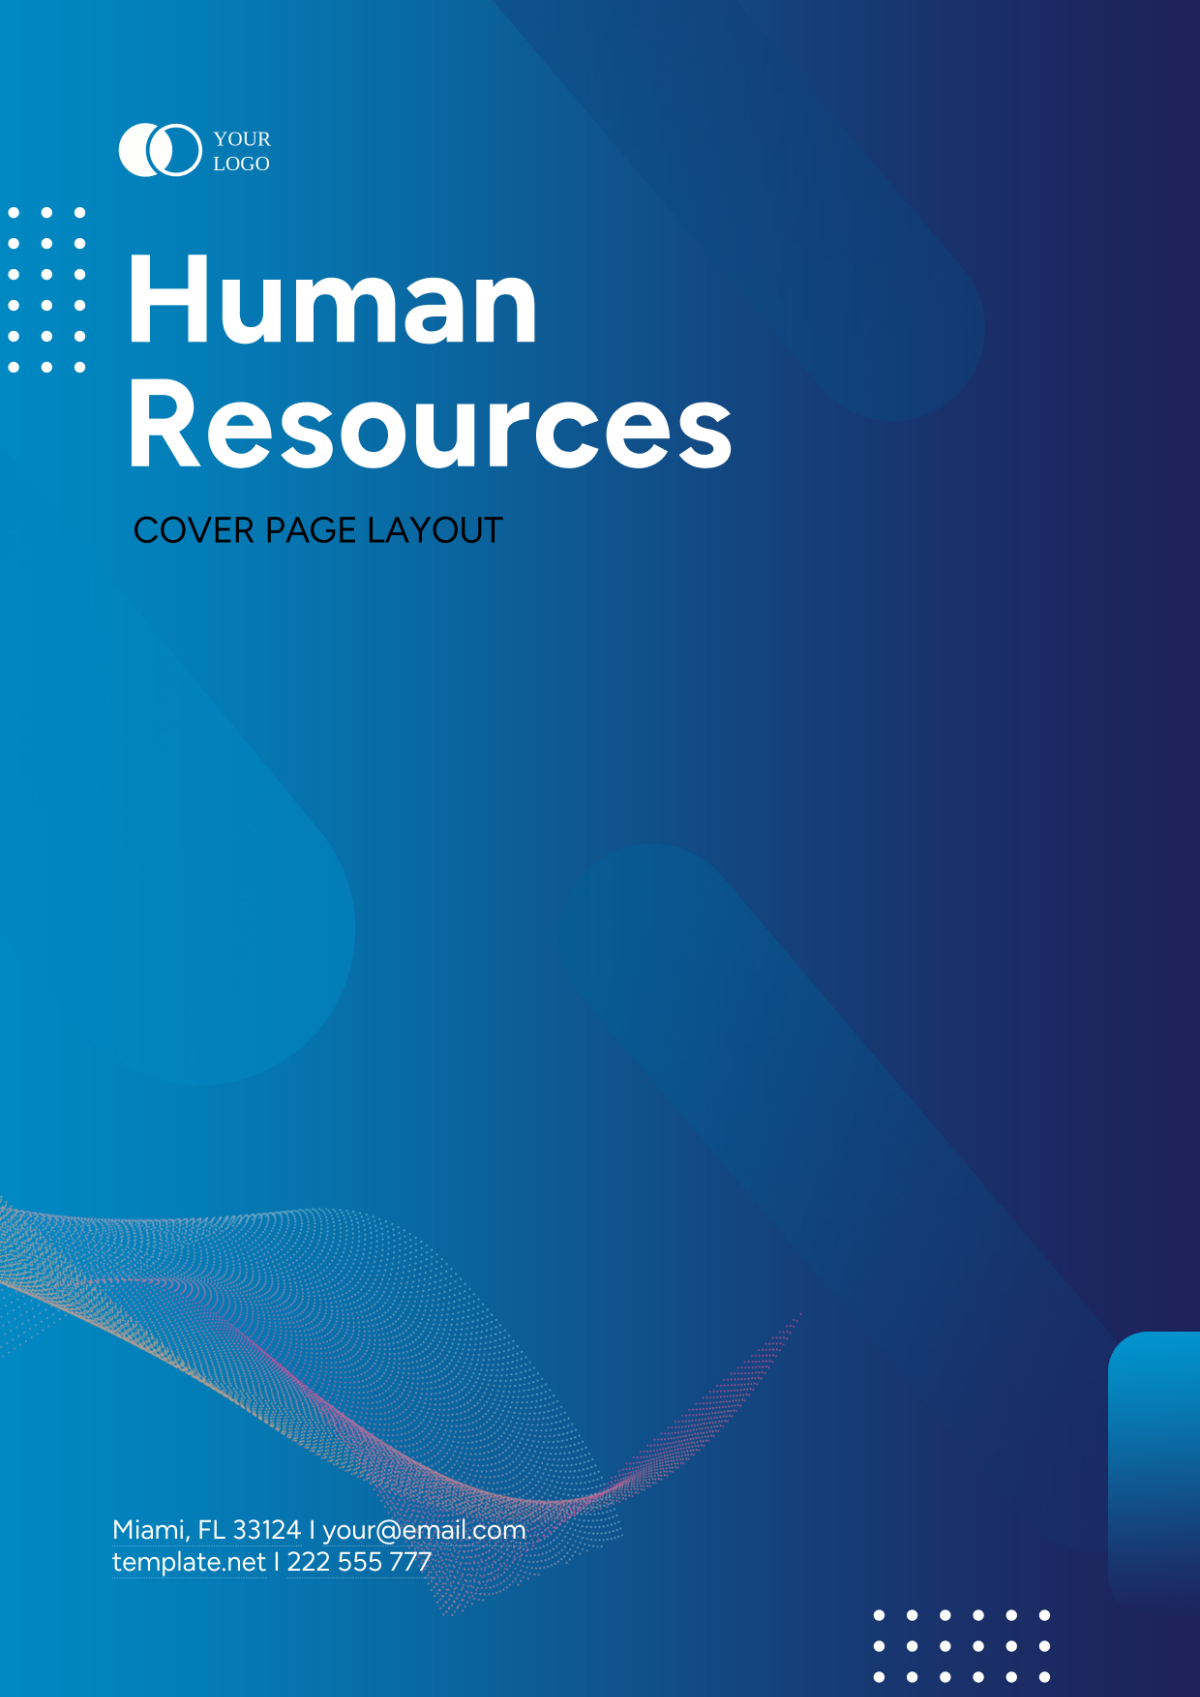 Human Resources Cover Page Layout Template